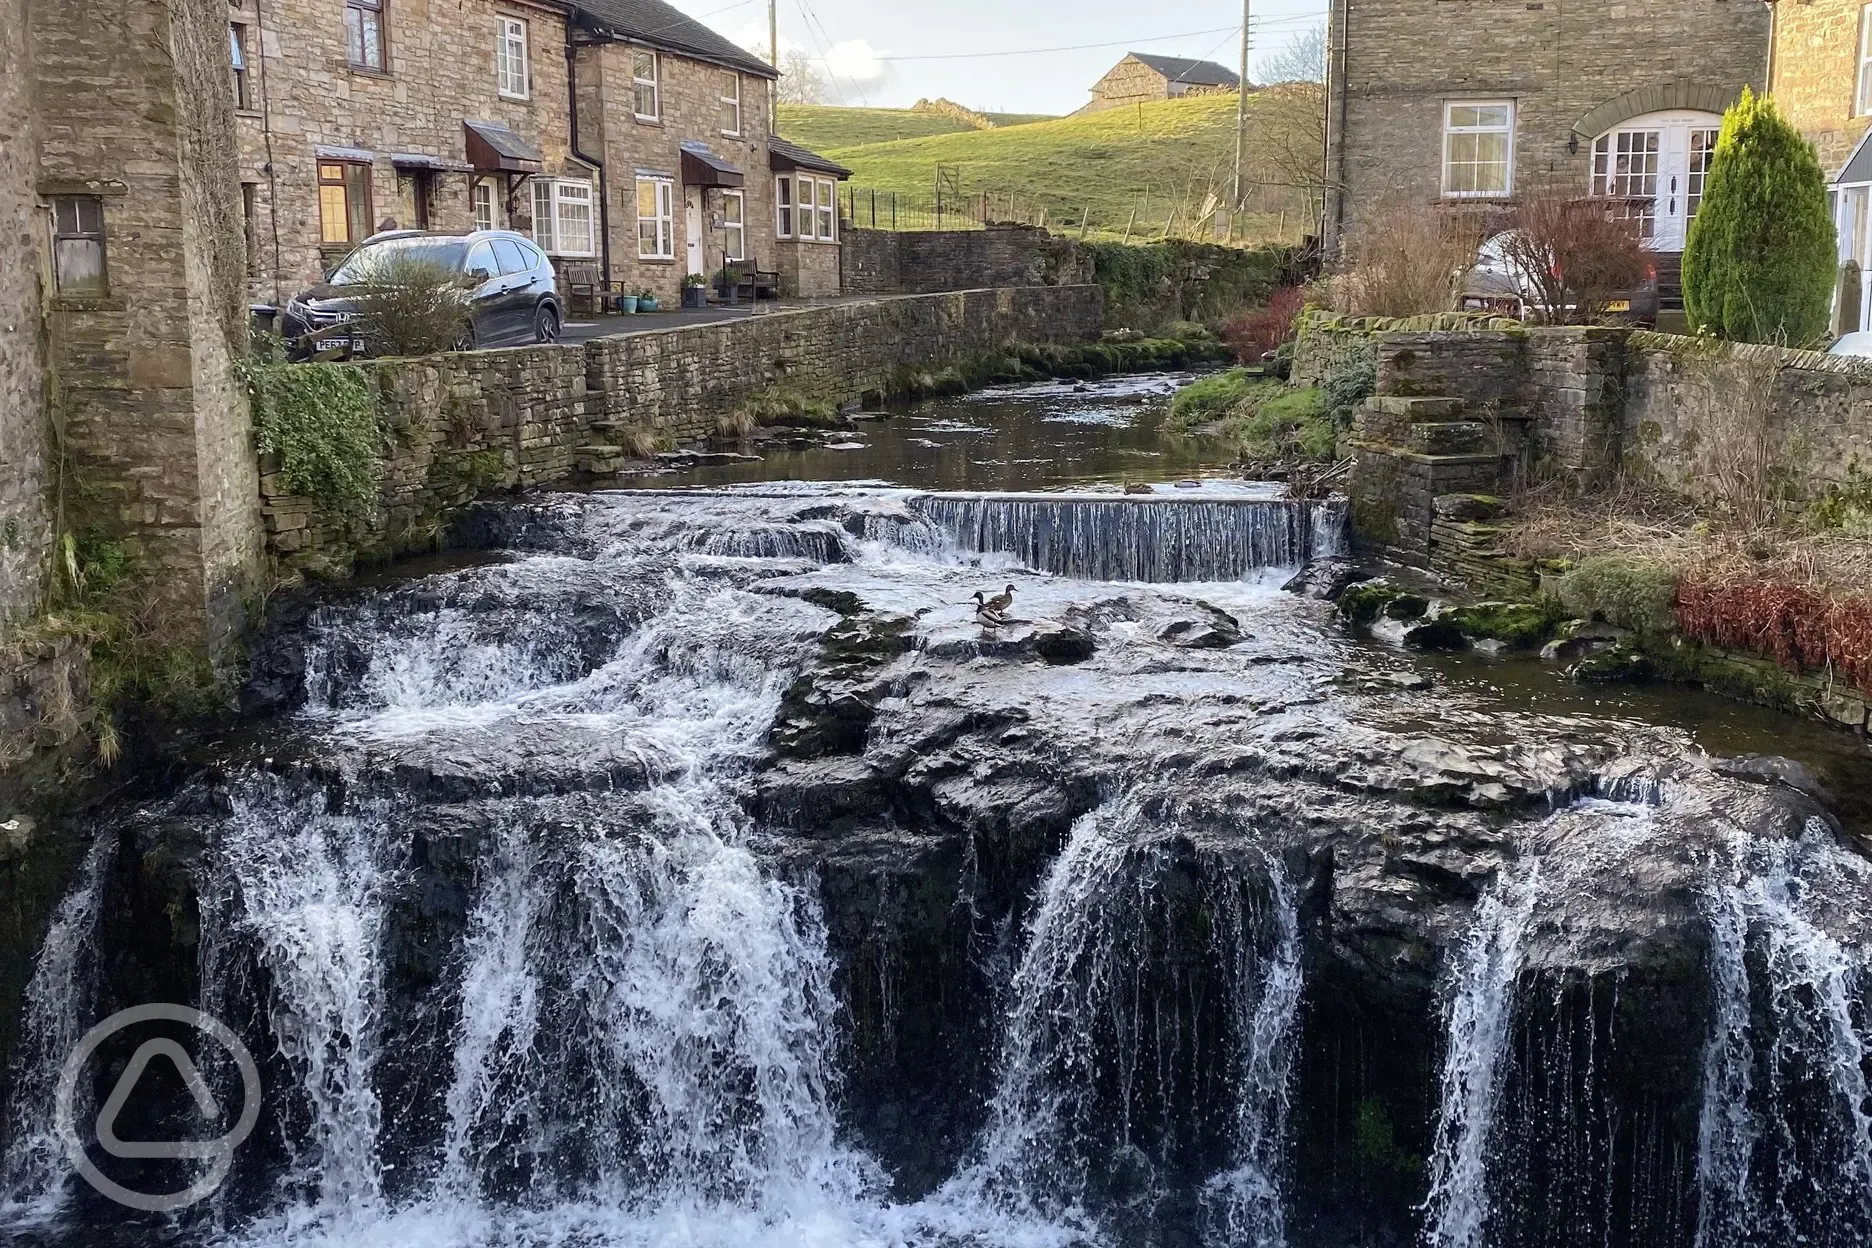 Nearby Hawes